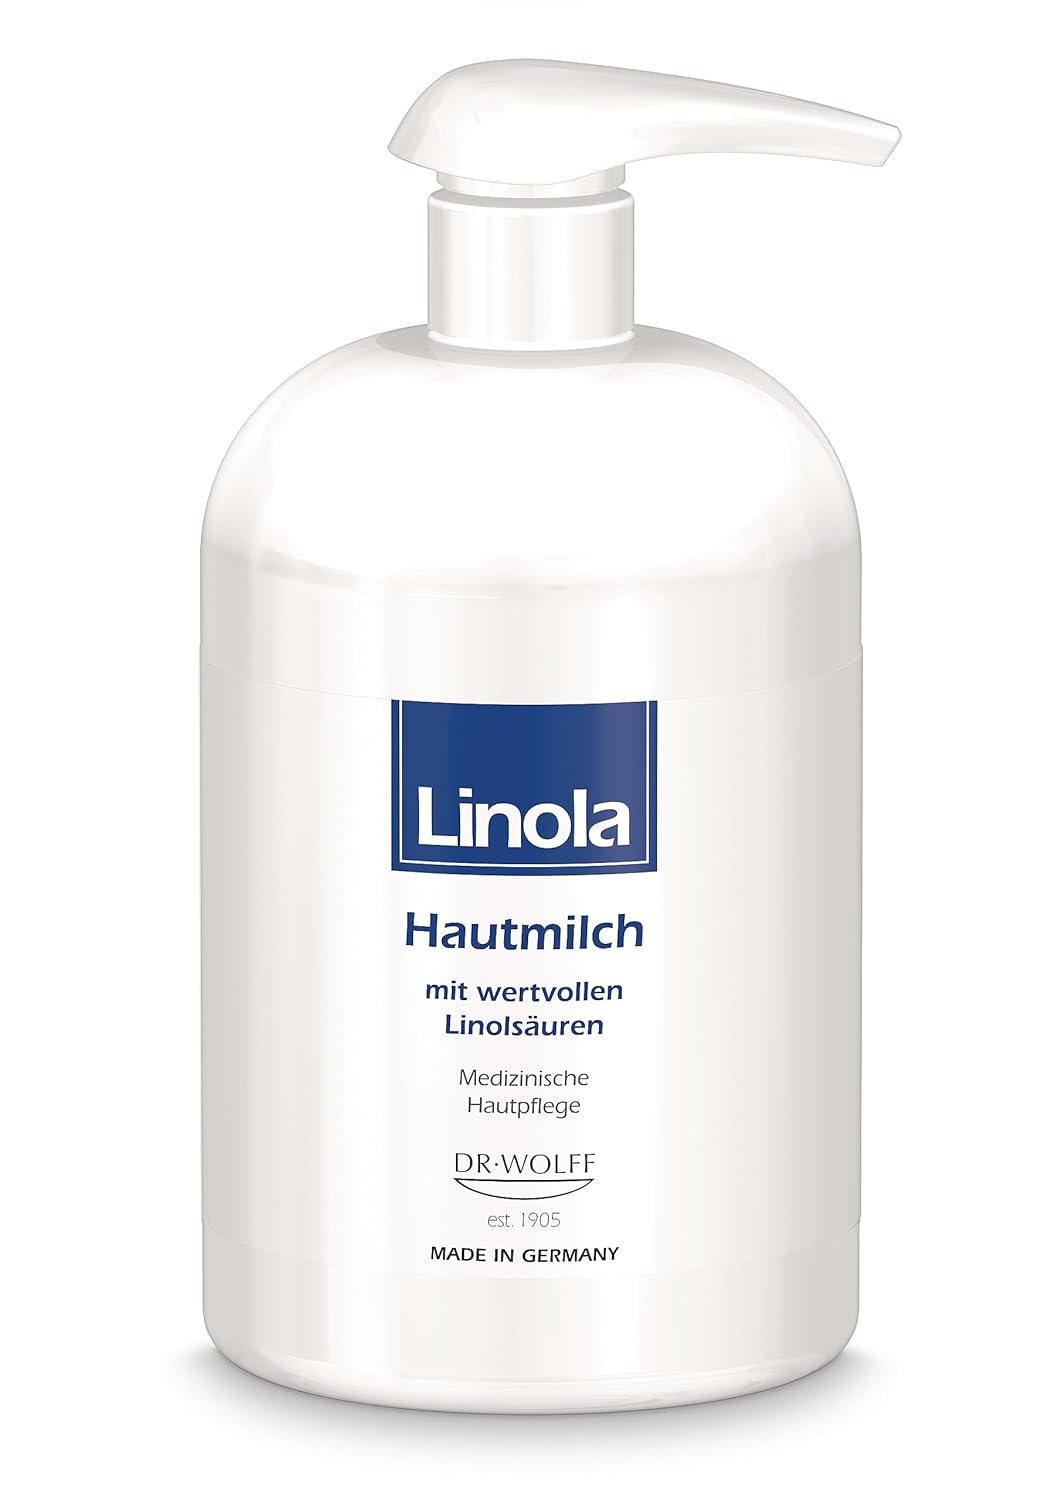 Linola Skin Milk - 500 ml in Dispenser | Body Lotion for All Forms of Dry, Stressed and Neurodermatitis Prone Skin